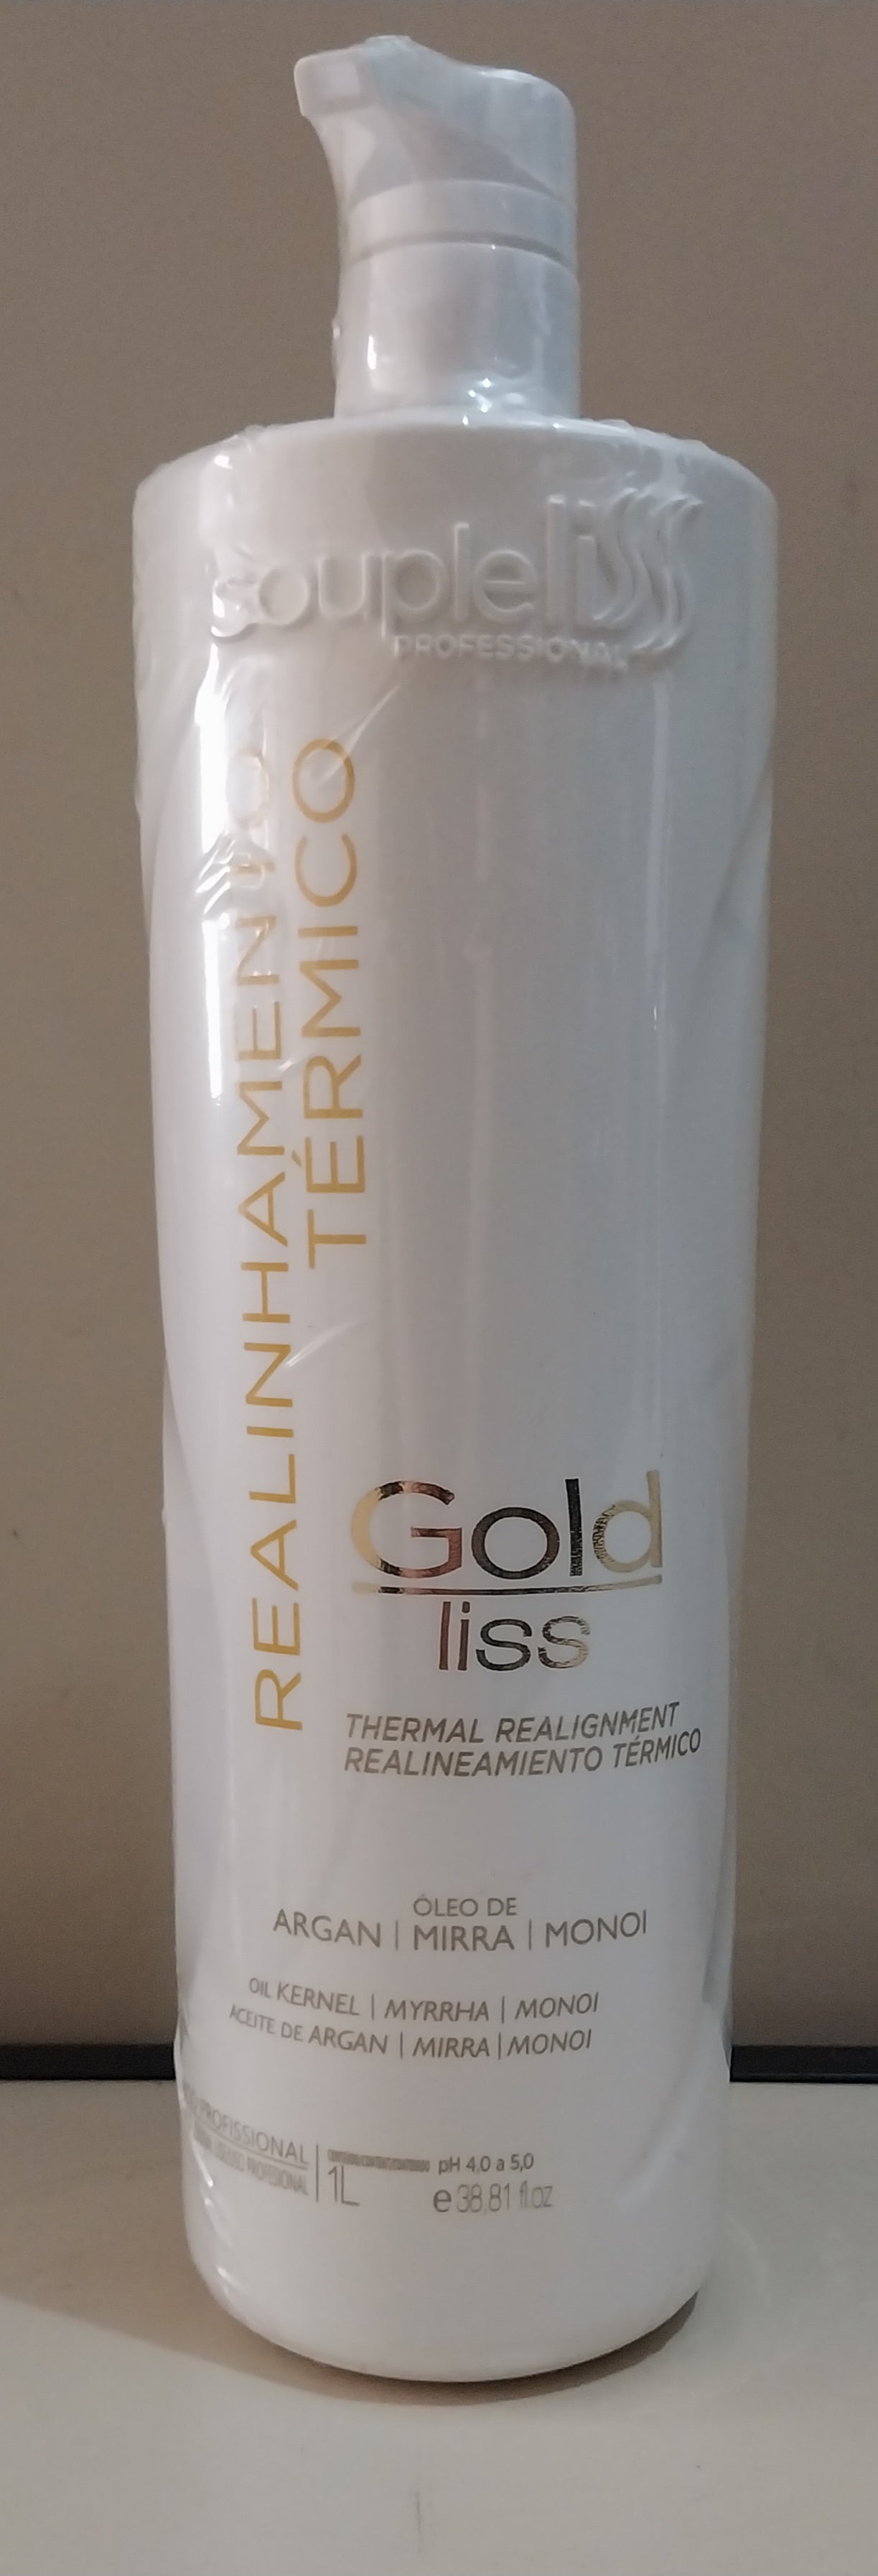 Gold Liss Thermal Realignment Sealing Macadamia Argan Treatment 1L - Souple Liss